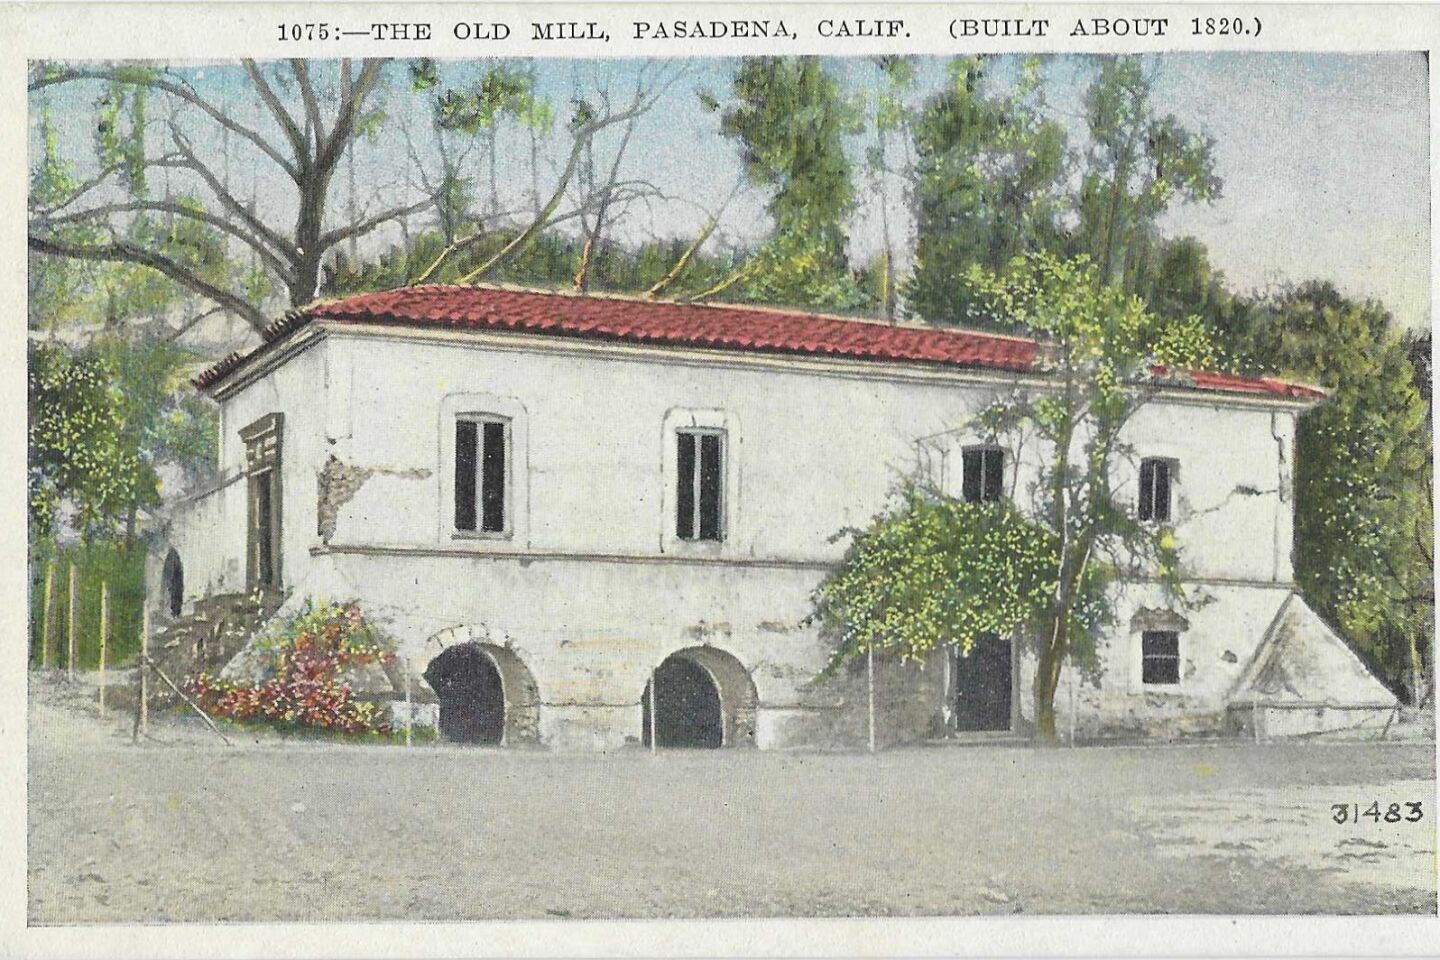 The front of a postcard depicting the Old Mill in present-day San Marino